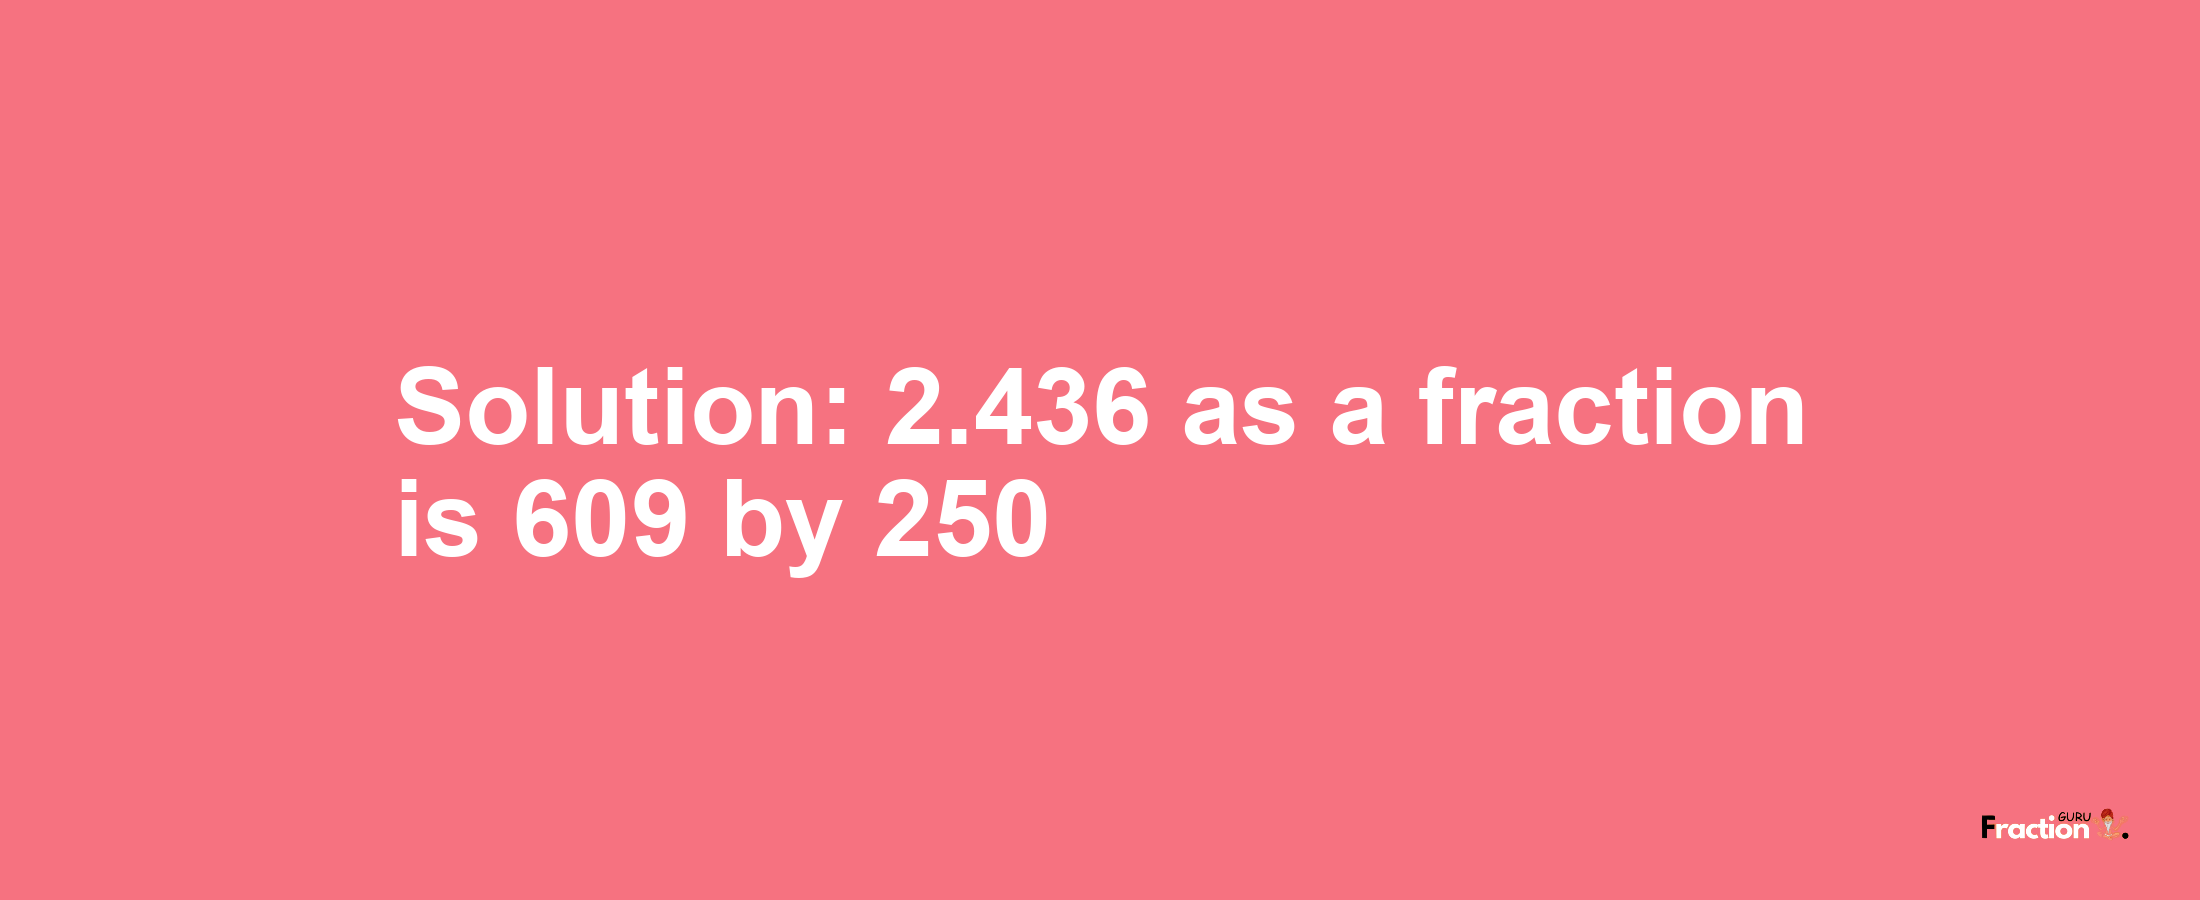 Solution:2.436 as a fraction is 609/250